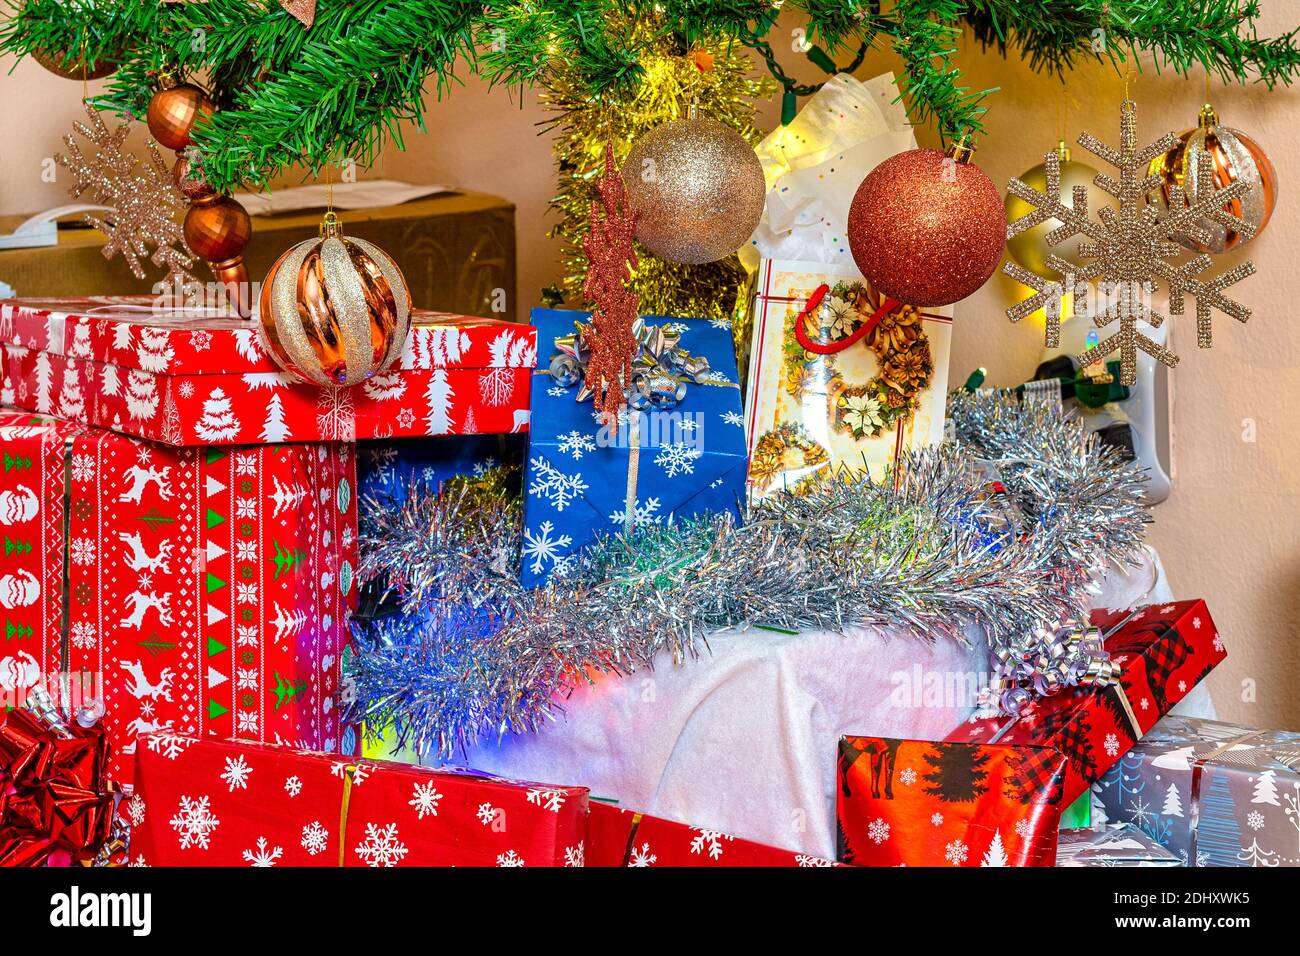 Christmas presents or gifts under the Christmas Tree Stock Photo